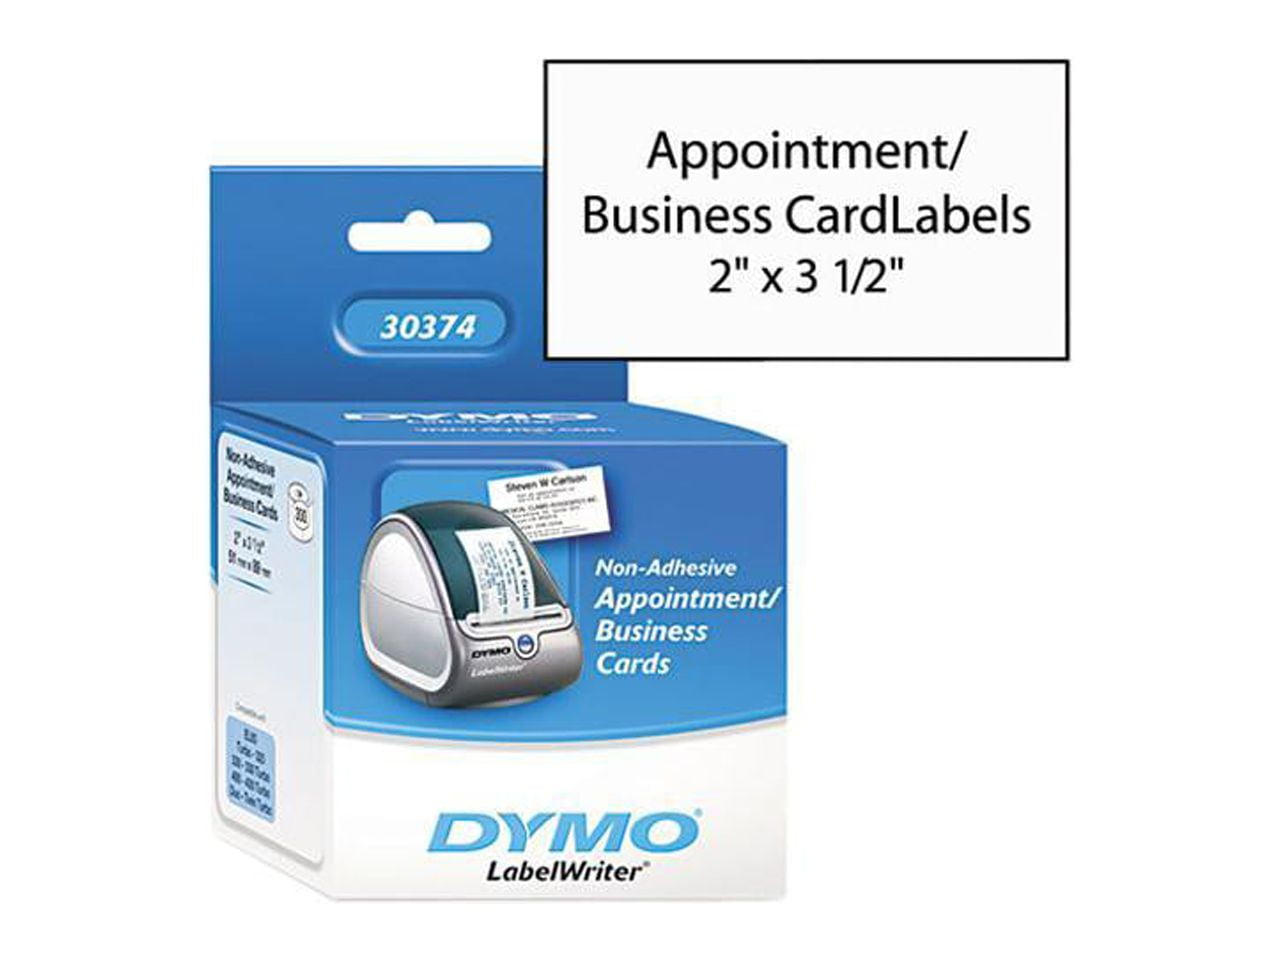 dymo lv-30374 appointment cards - 300 white replacement